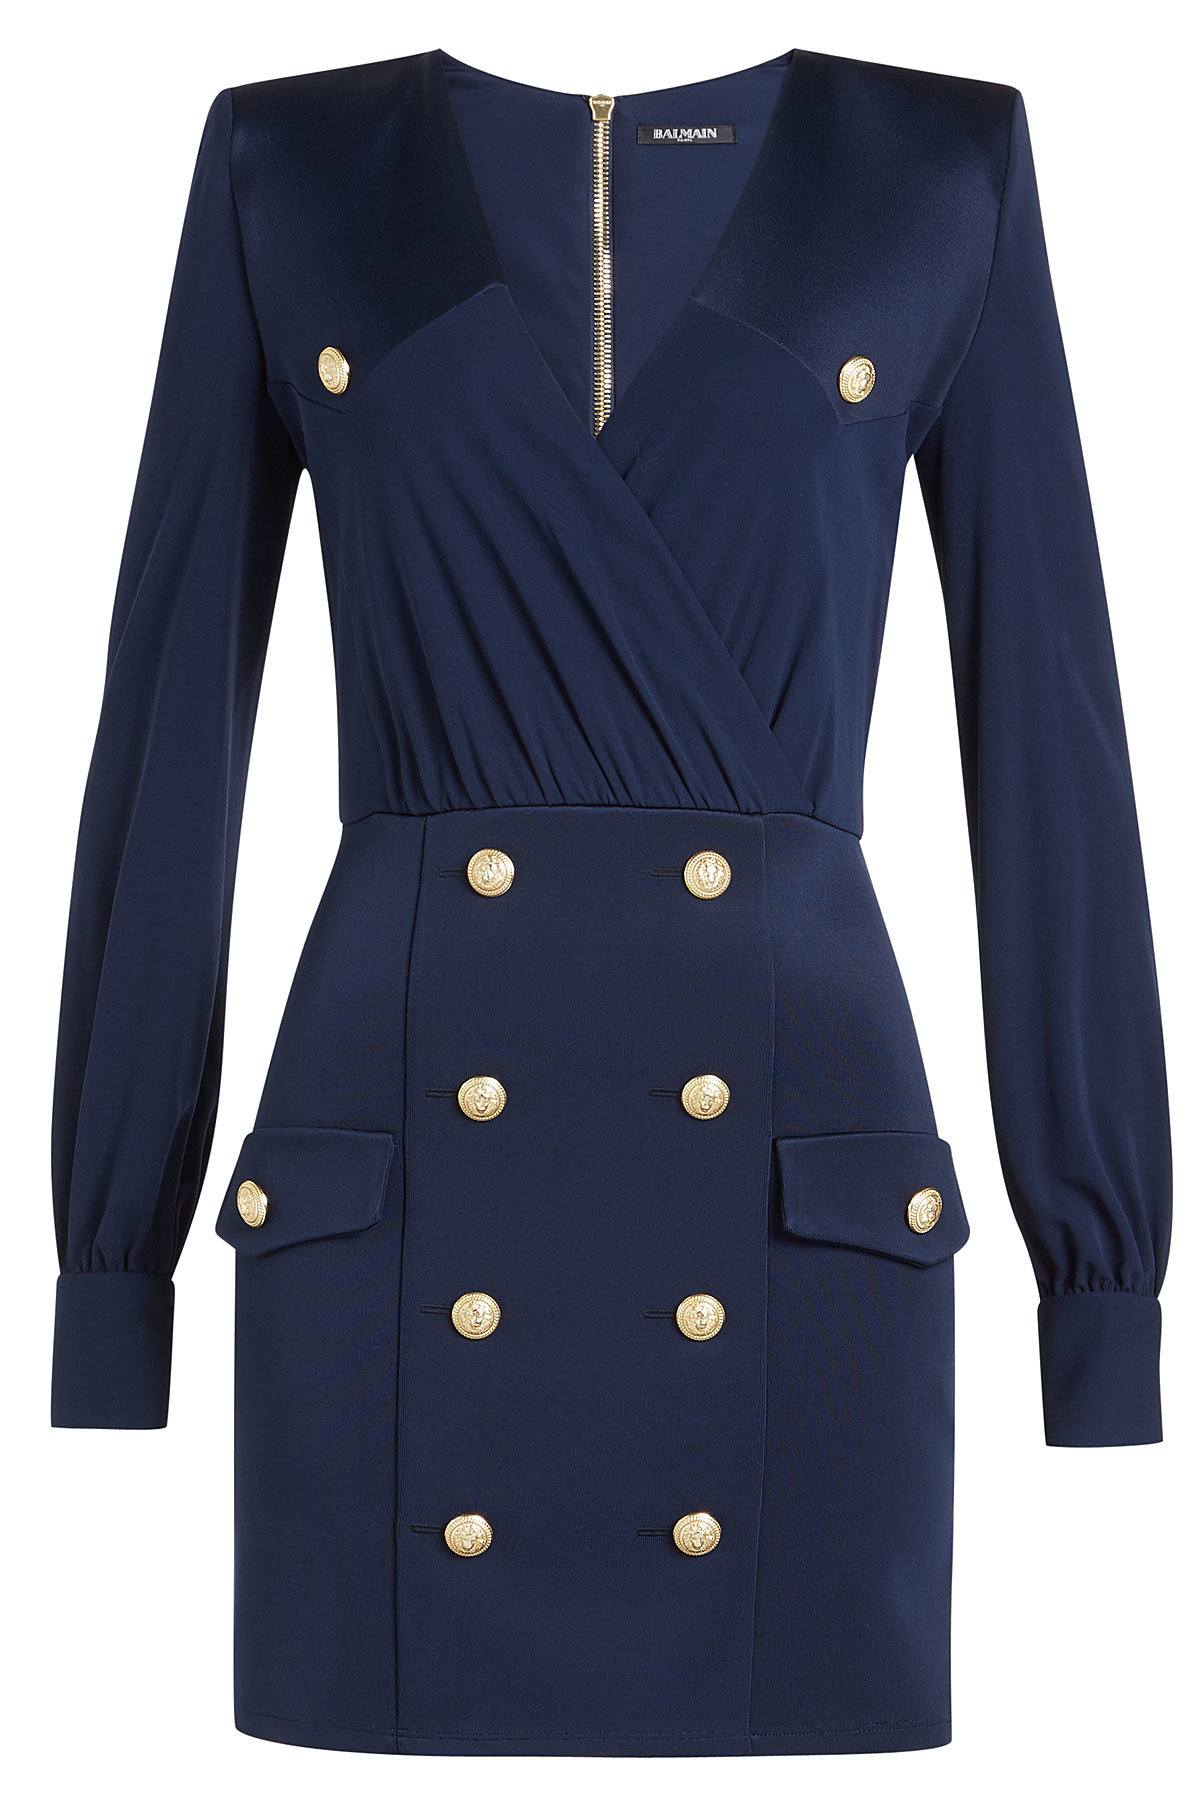 Balmain - Draped Dress with Embossed Buttons